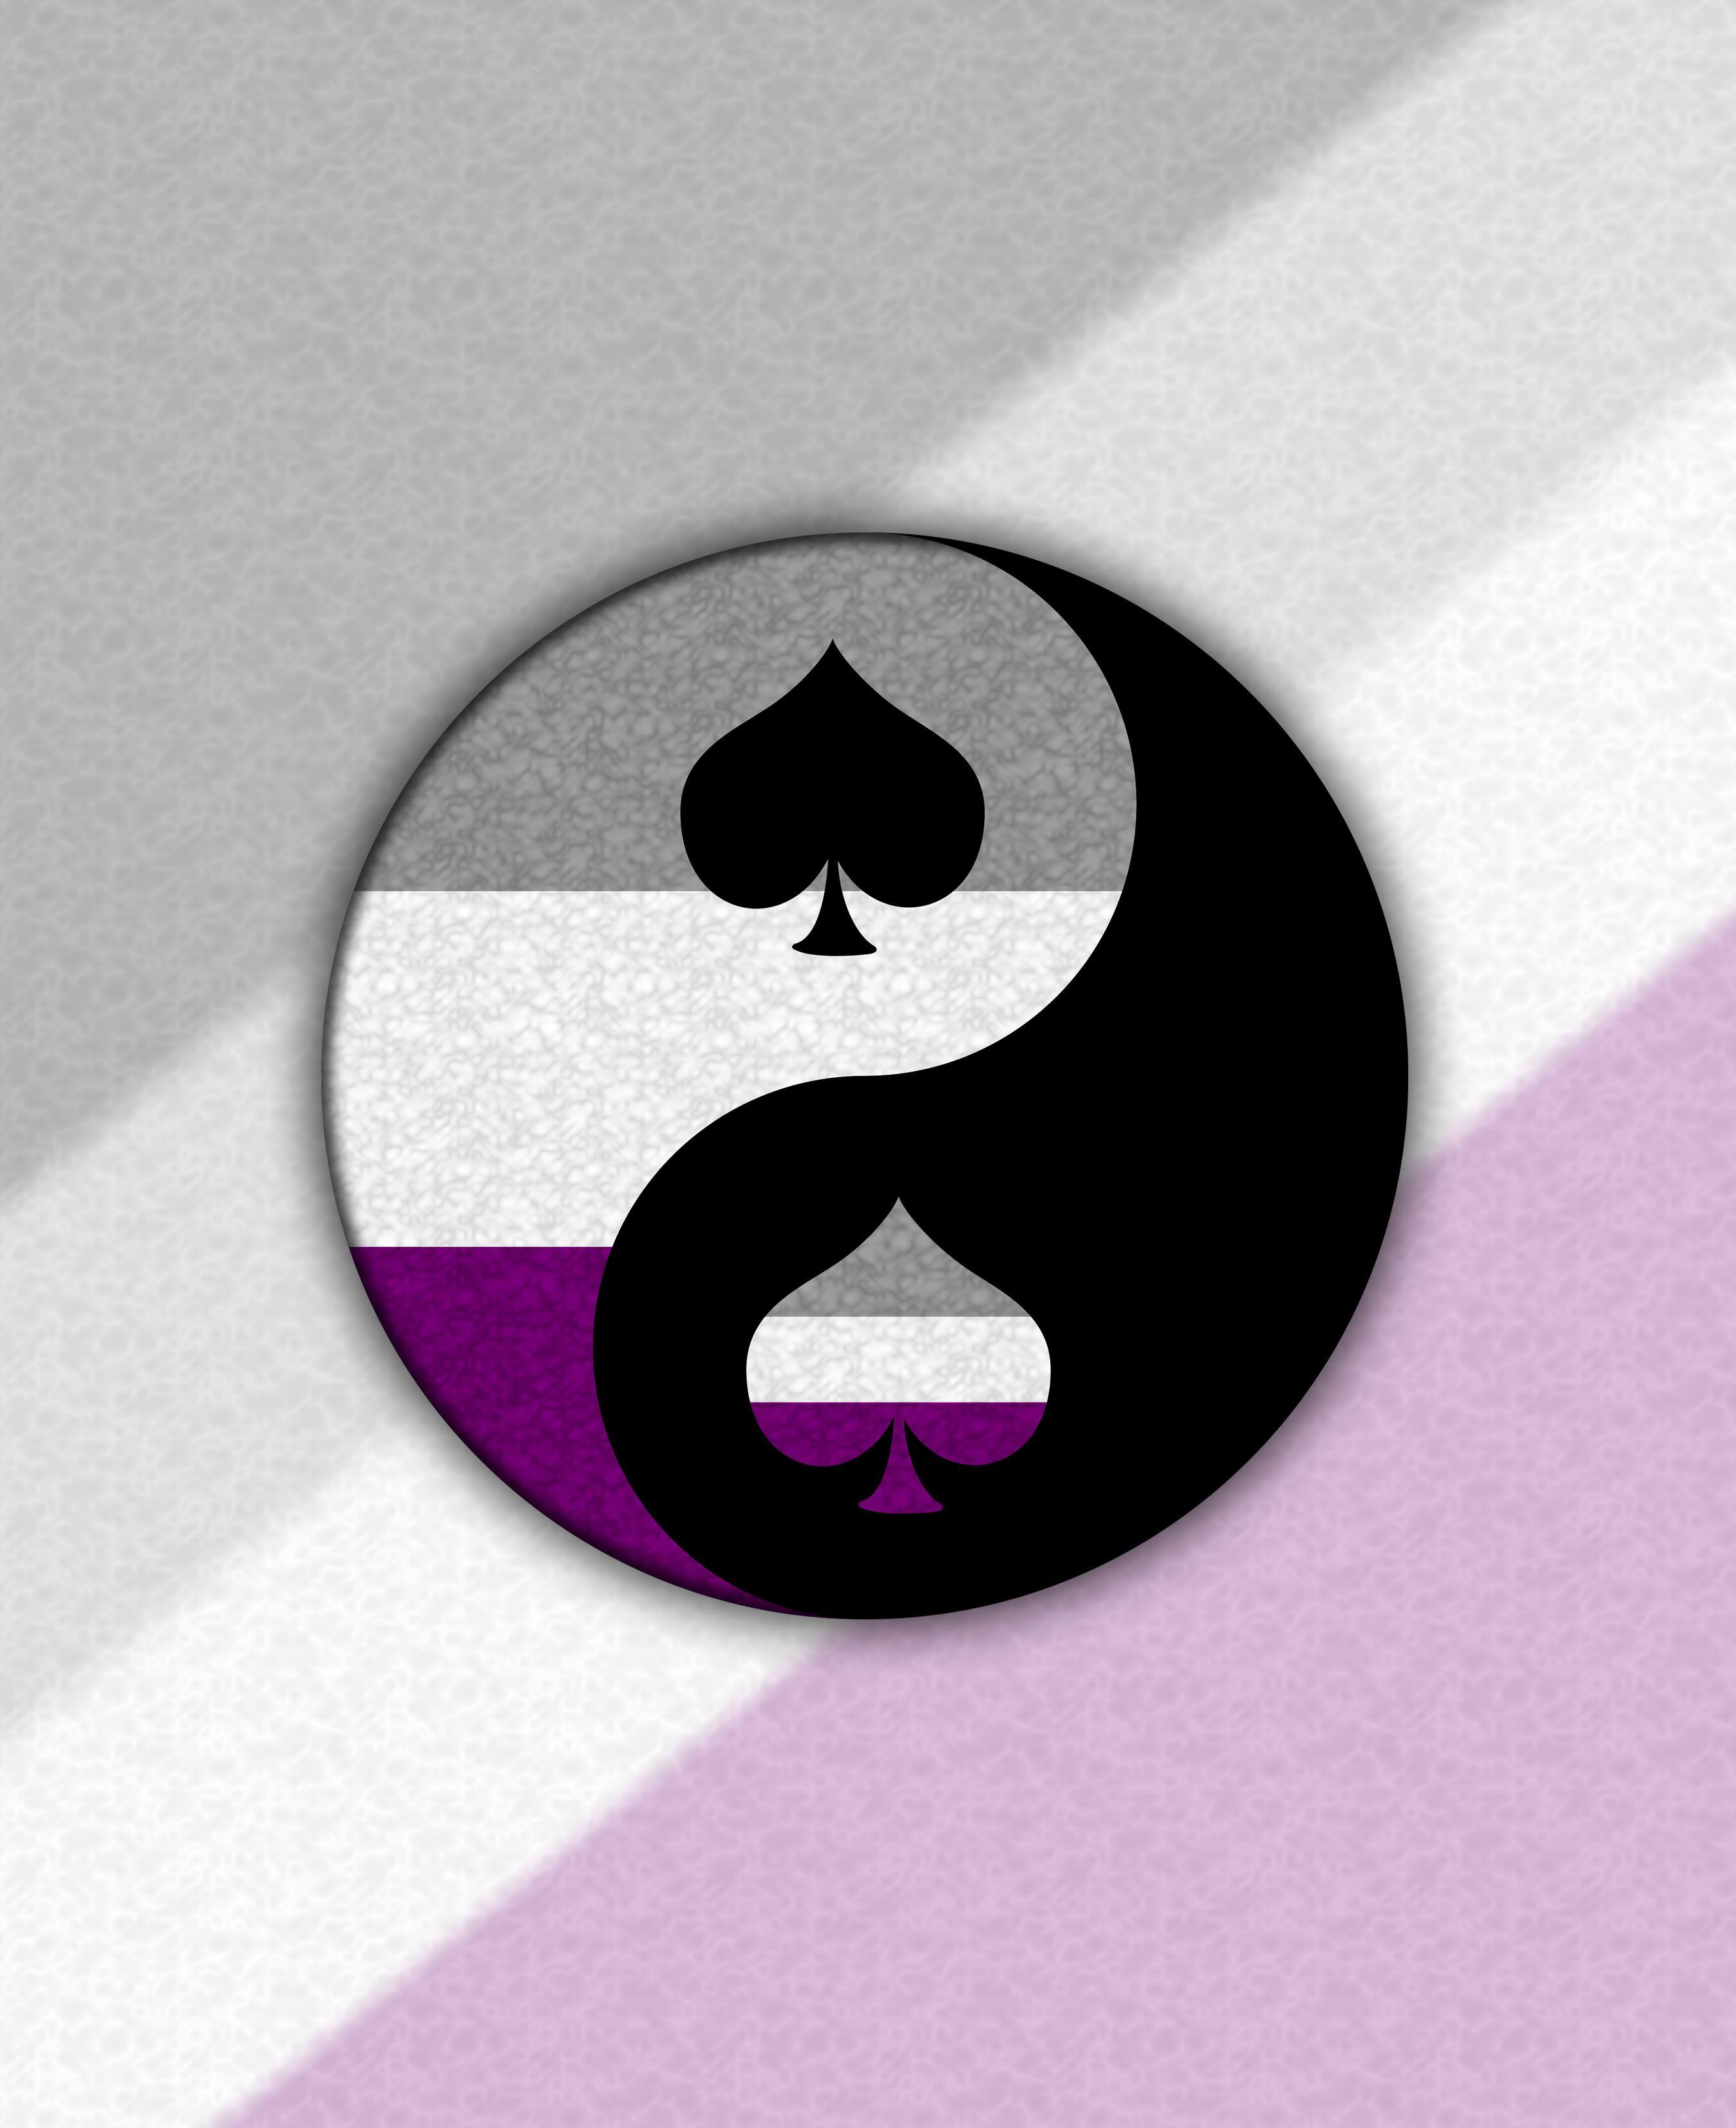 Purple and White Circle Logo - Asexual pride Yin and Yang with spade symbols. Black, gray, white